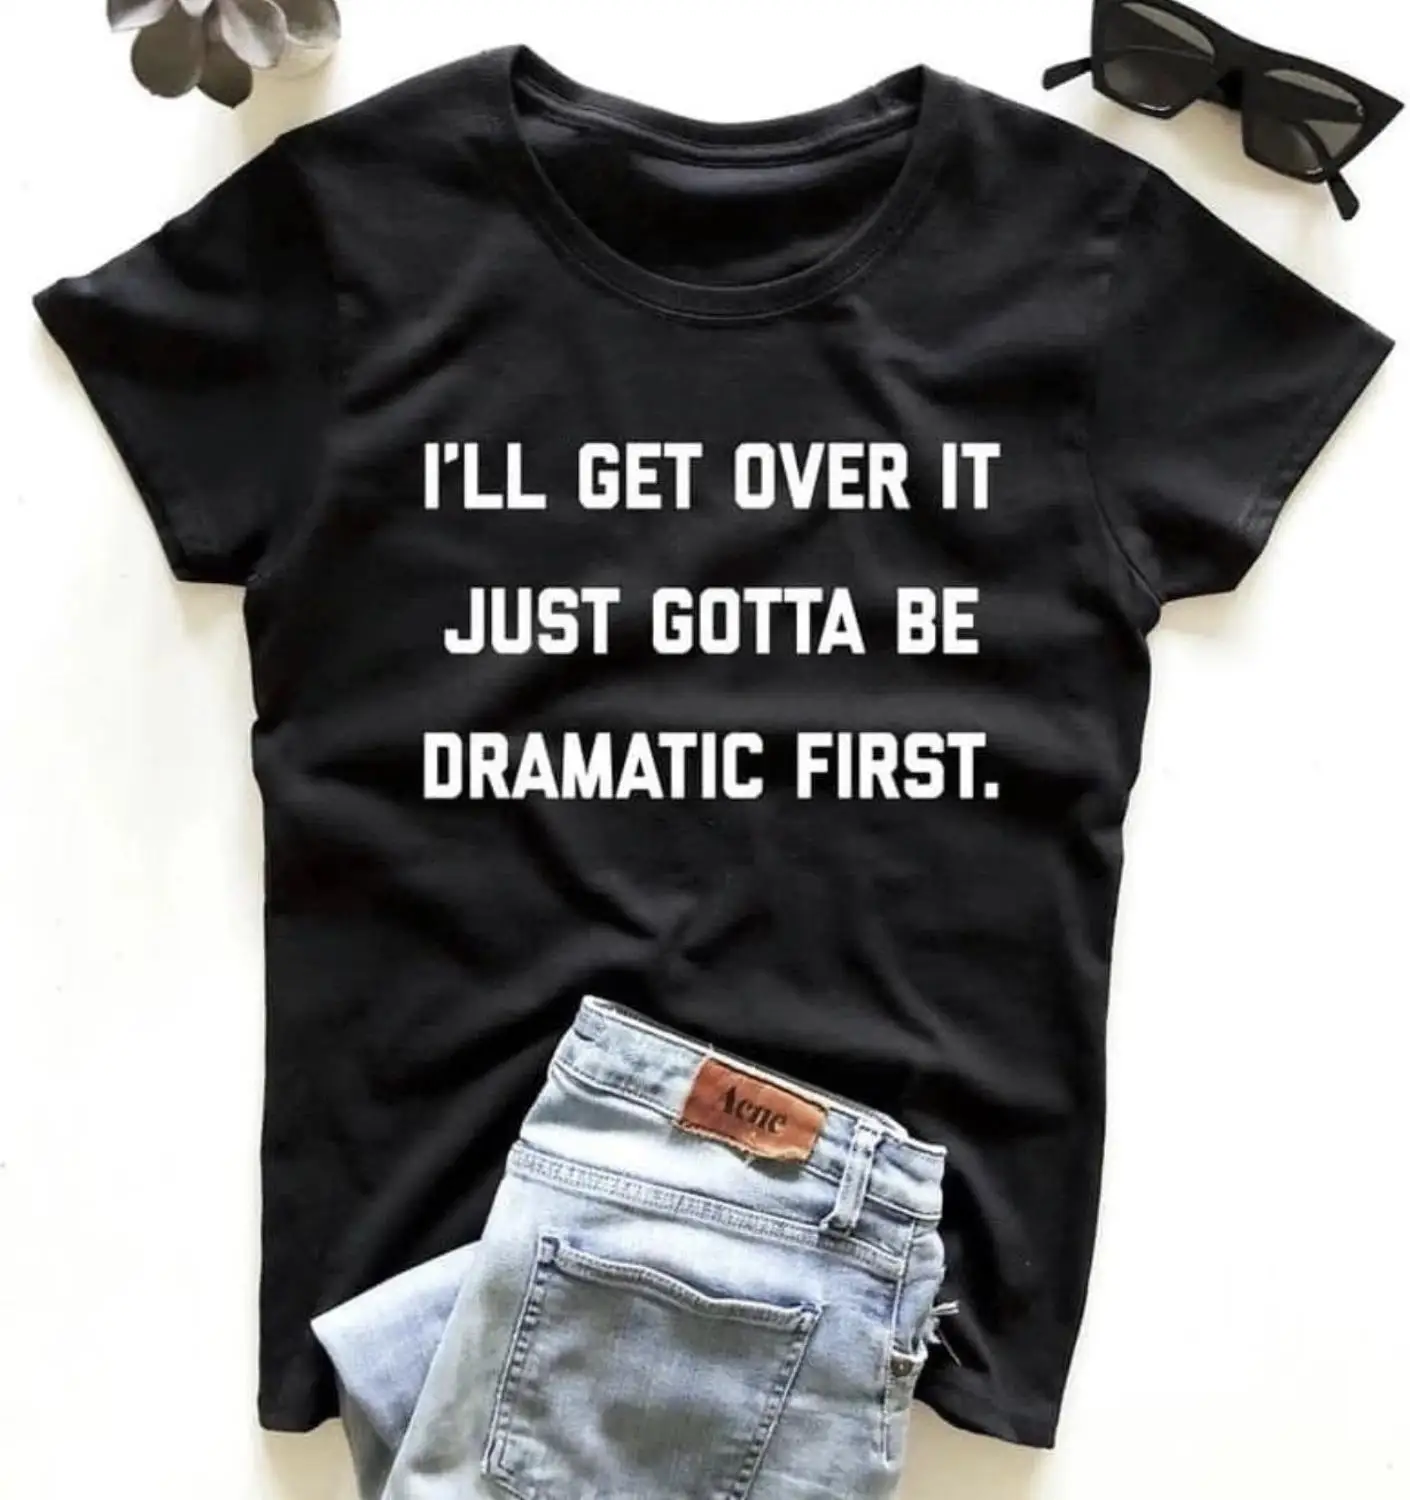 

I'll get over it just gotta be dramatic first t-shirt hipster unisex women 100% Cotton aesthetic tee top tshirt Drop Shipping